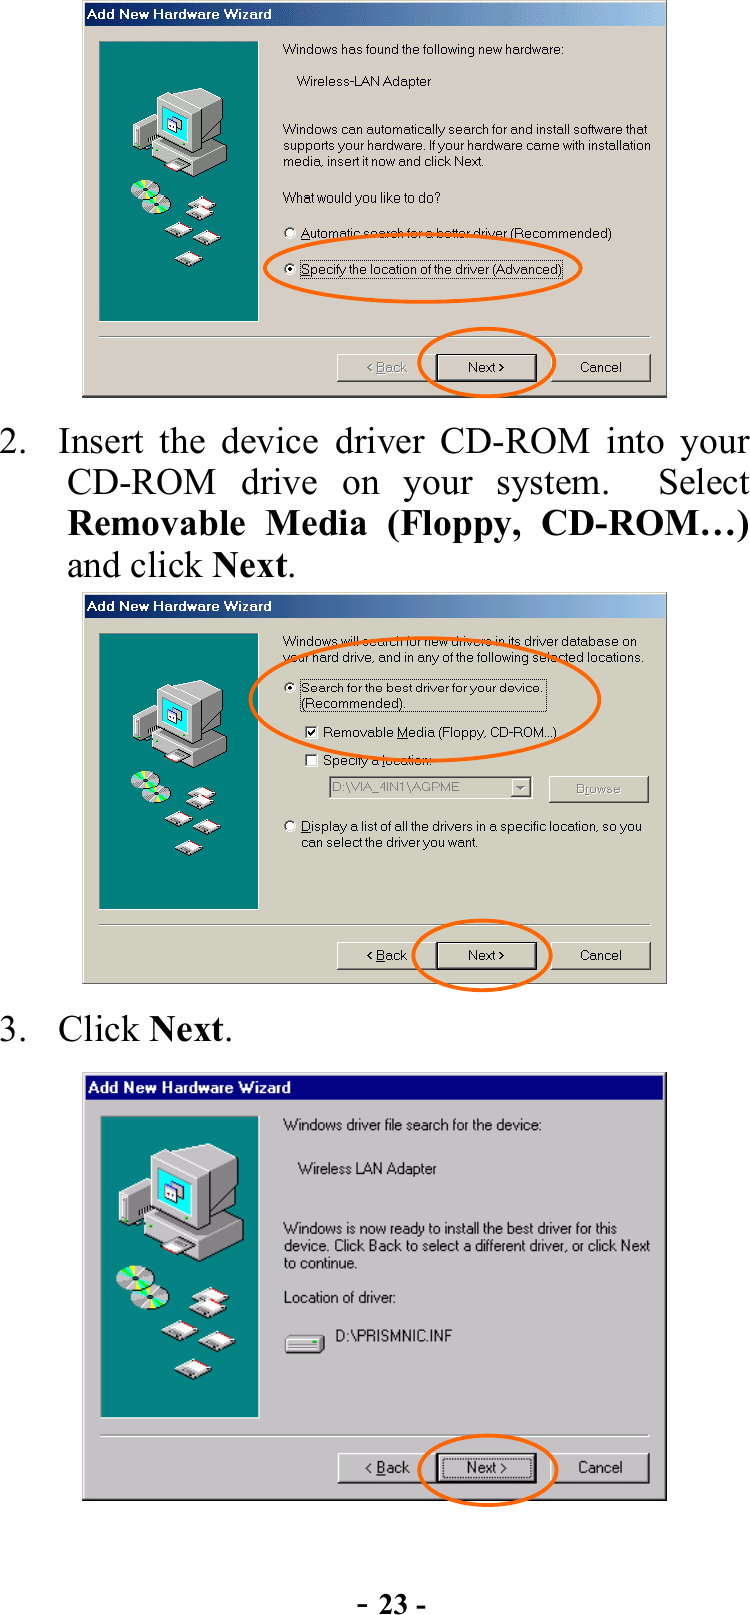  - 23 -  2.  Insert the device driver CD-ROM into your CD-ROM drive on your system.  Select Removable Media (Floppy, CD-ROM…) and click Next.  3. Click Next.  